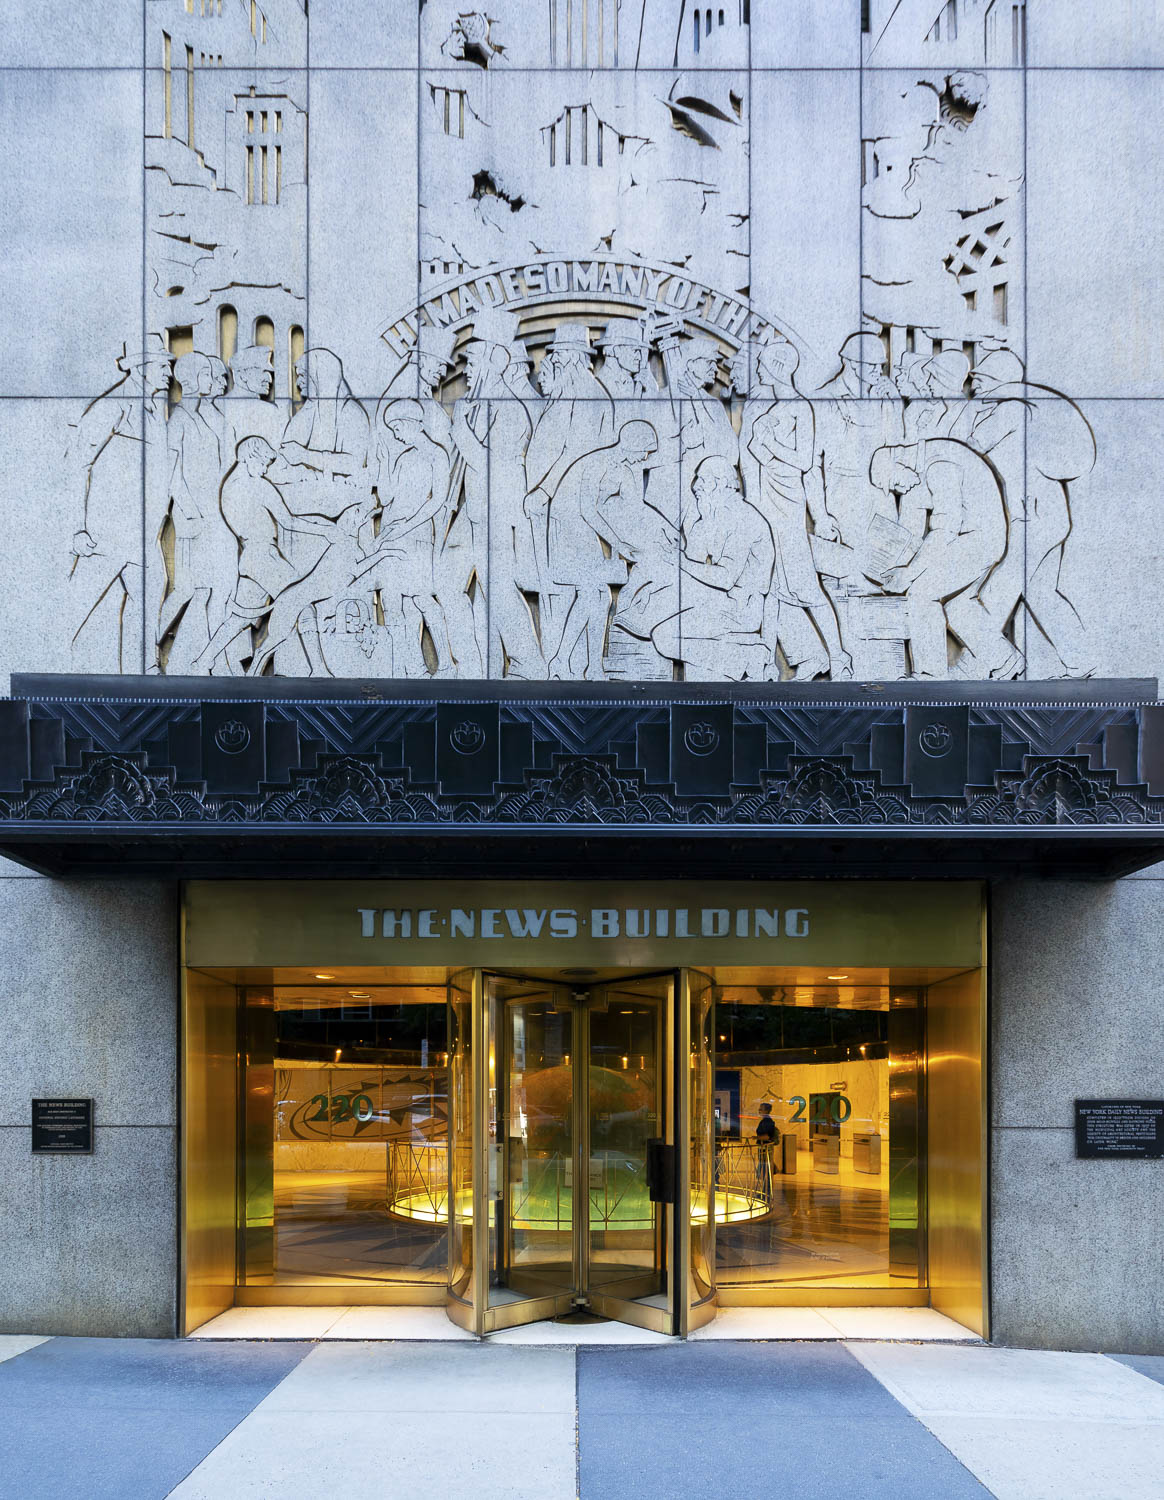 A color photograph of the entrance of a building. The lower portion features a revolving door with golden frames. Above the door is the name of the skyscraper: “The News Building.” The lobby of the building with a large globe is visible through the revolving doors. Above the entryway is a narrow metal overhand with a repeating geometric patter. Above this is a large surface of light-colored stone sculpted with the silhouettes of two dozen people of all ages dressed differently and carrying tools. The sculpture is very flat, as if each of the pieces are cutouts. A golden background shines through.